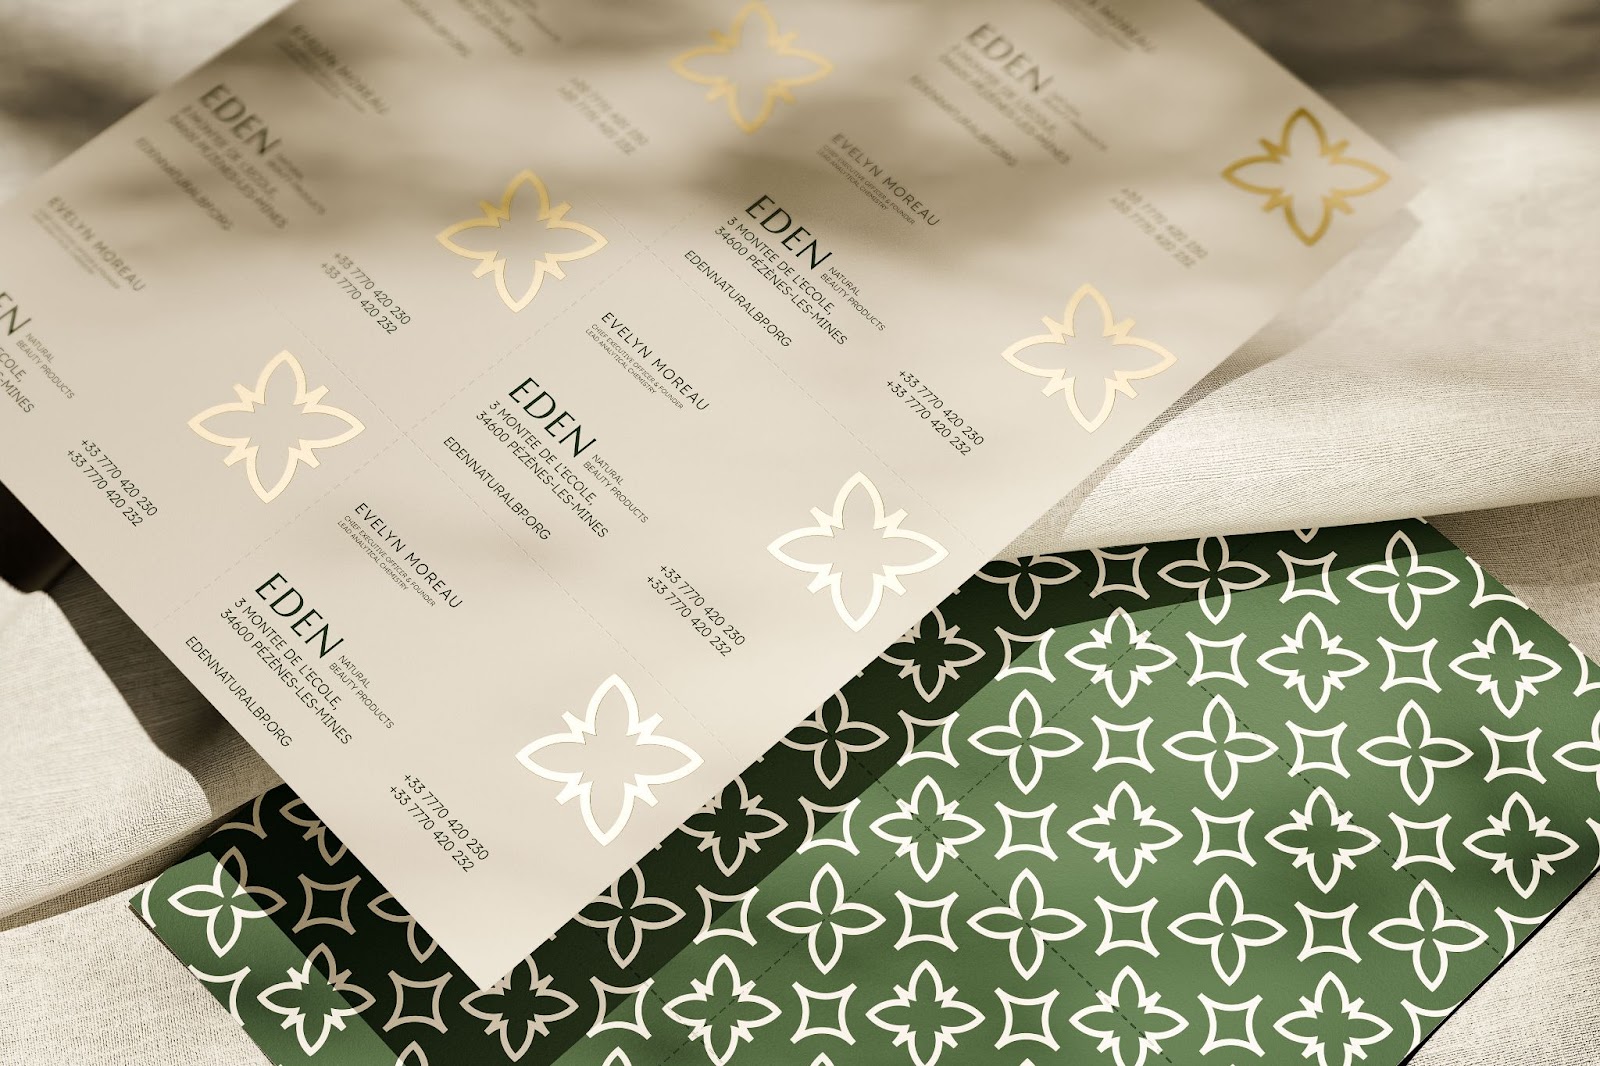 Artifact from the Eden Natural Beauty: Sustainable Branding and Visual Identity article on Abduzeedo